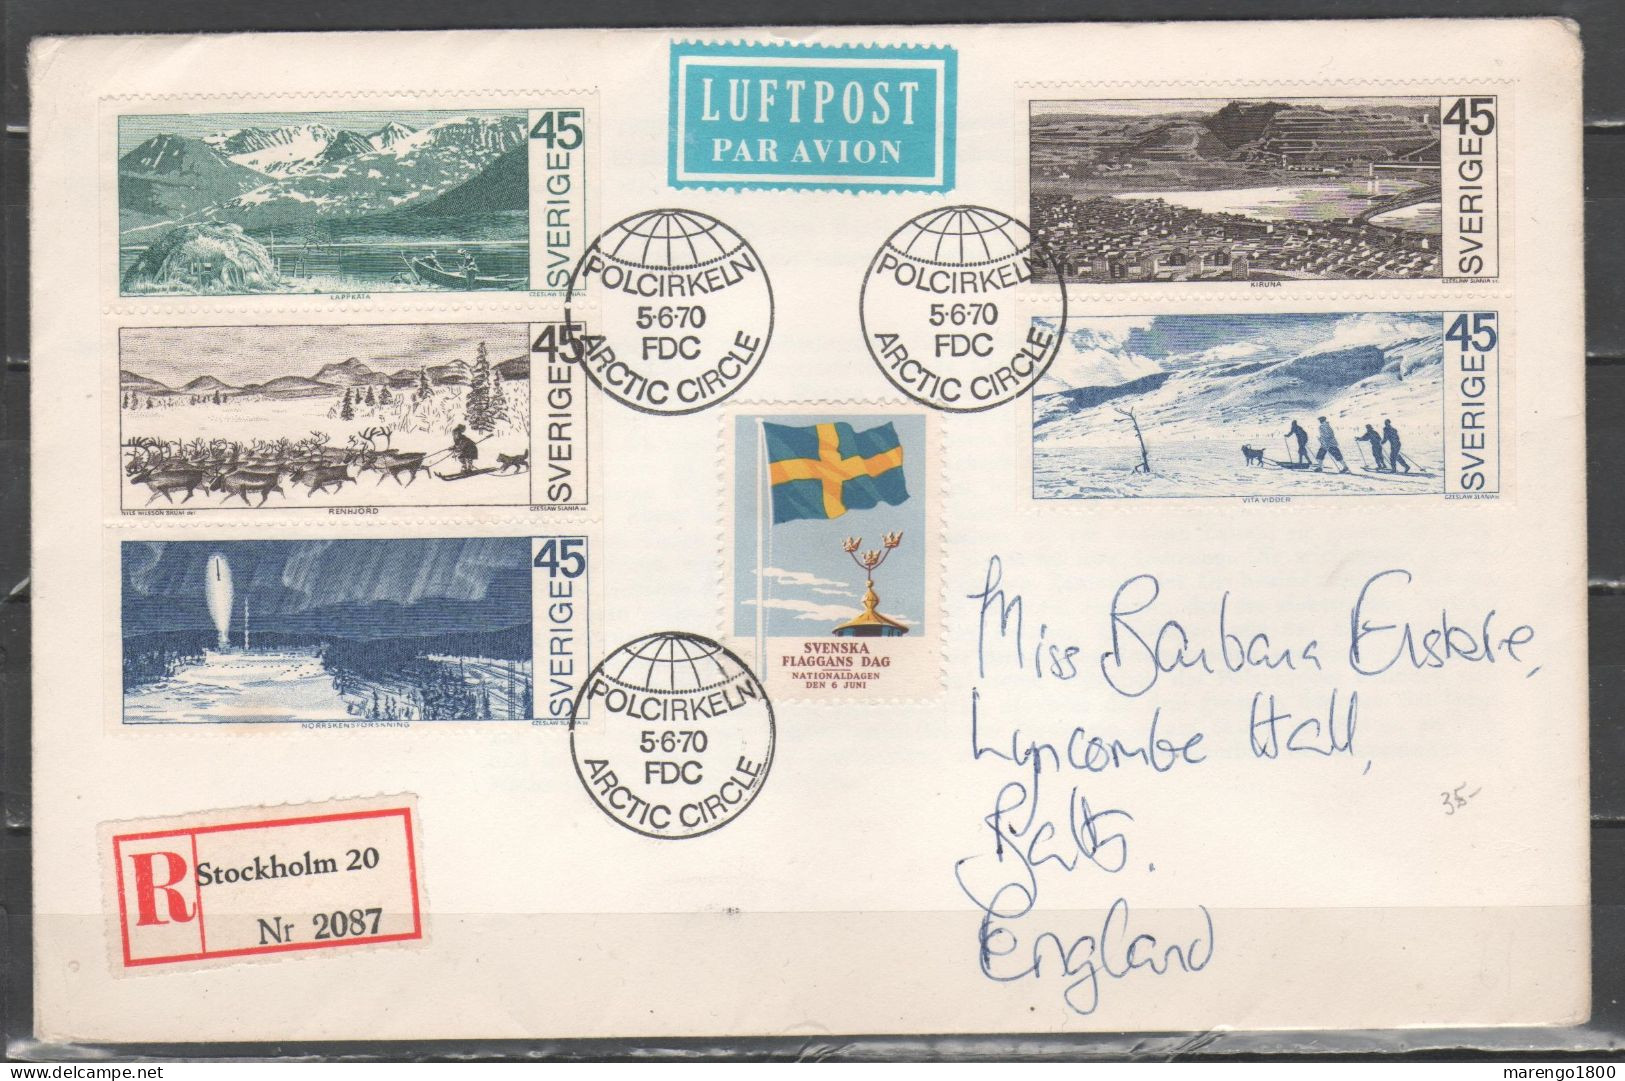 Sweden 1970 - Arctic Circle (Polcirkeln) Cancel FDC On Registered Letter To England       (g9687) - Covers & Documents